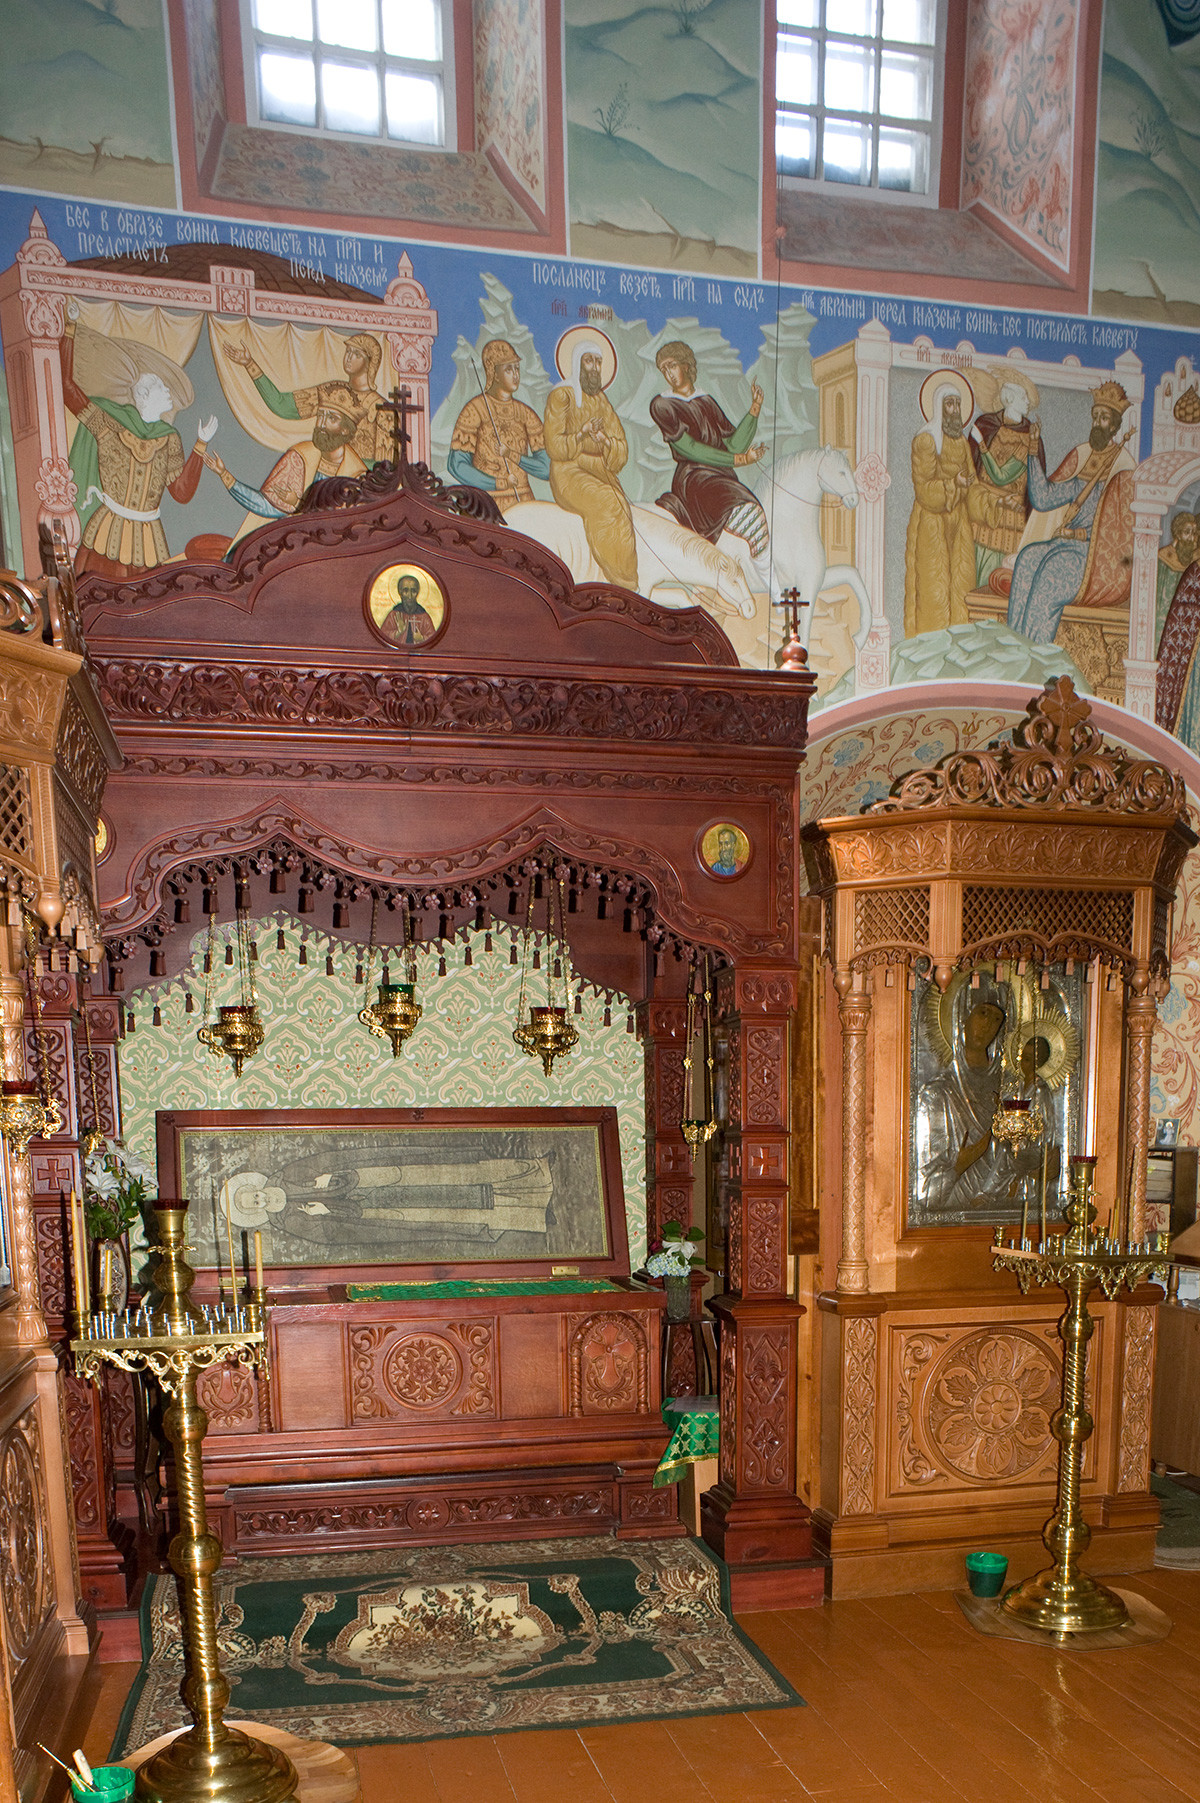 St. Avraamy Epiphany Monastery. Church of St. Nicholas over Holy Gate, Interior, north wall with sarcophagus containing relics of St. Avraamy of Rostov. July 6, 2019